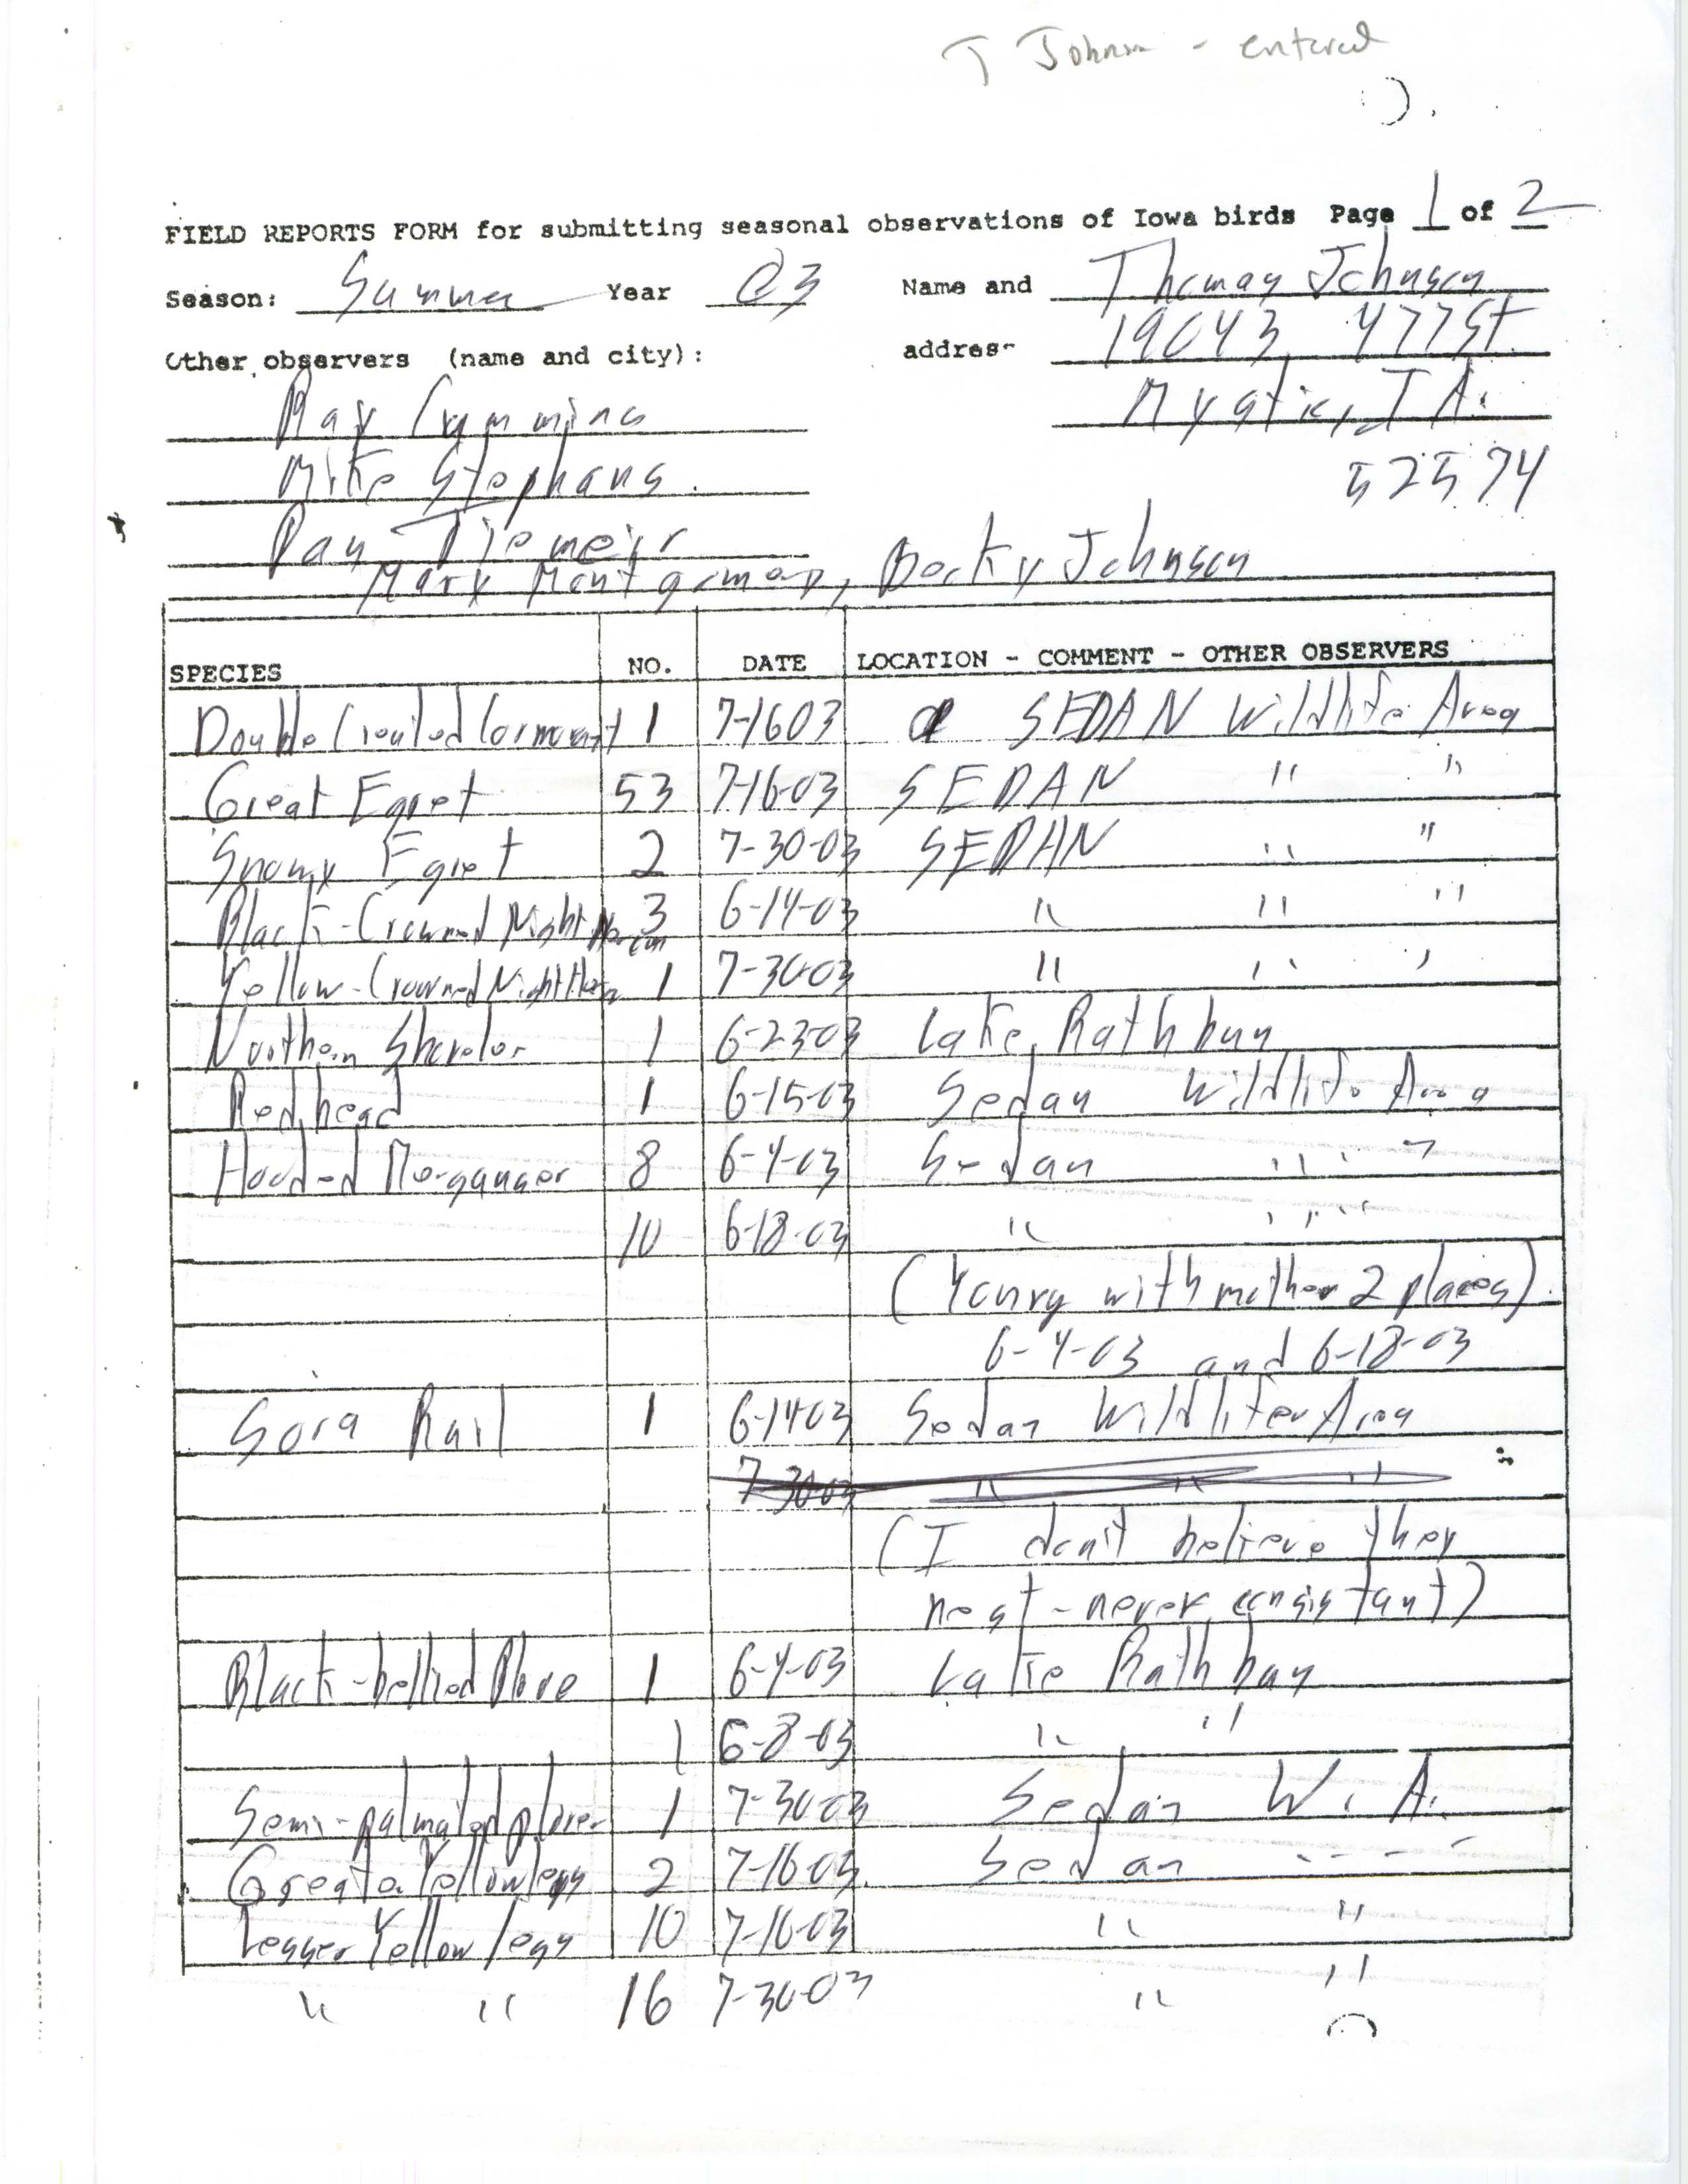 Field reports form for submitting seasonal observations of Iowa birds, Thomas N. Johnson, summer 2003